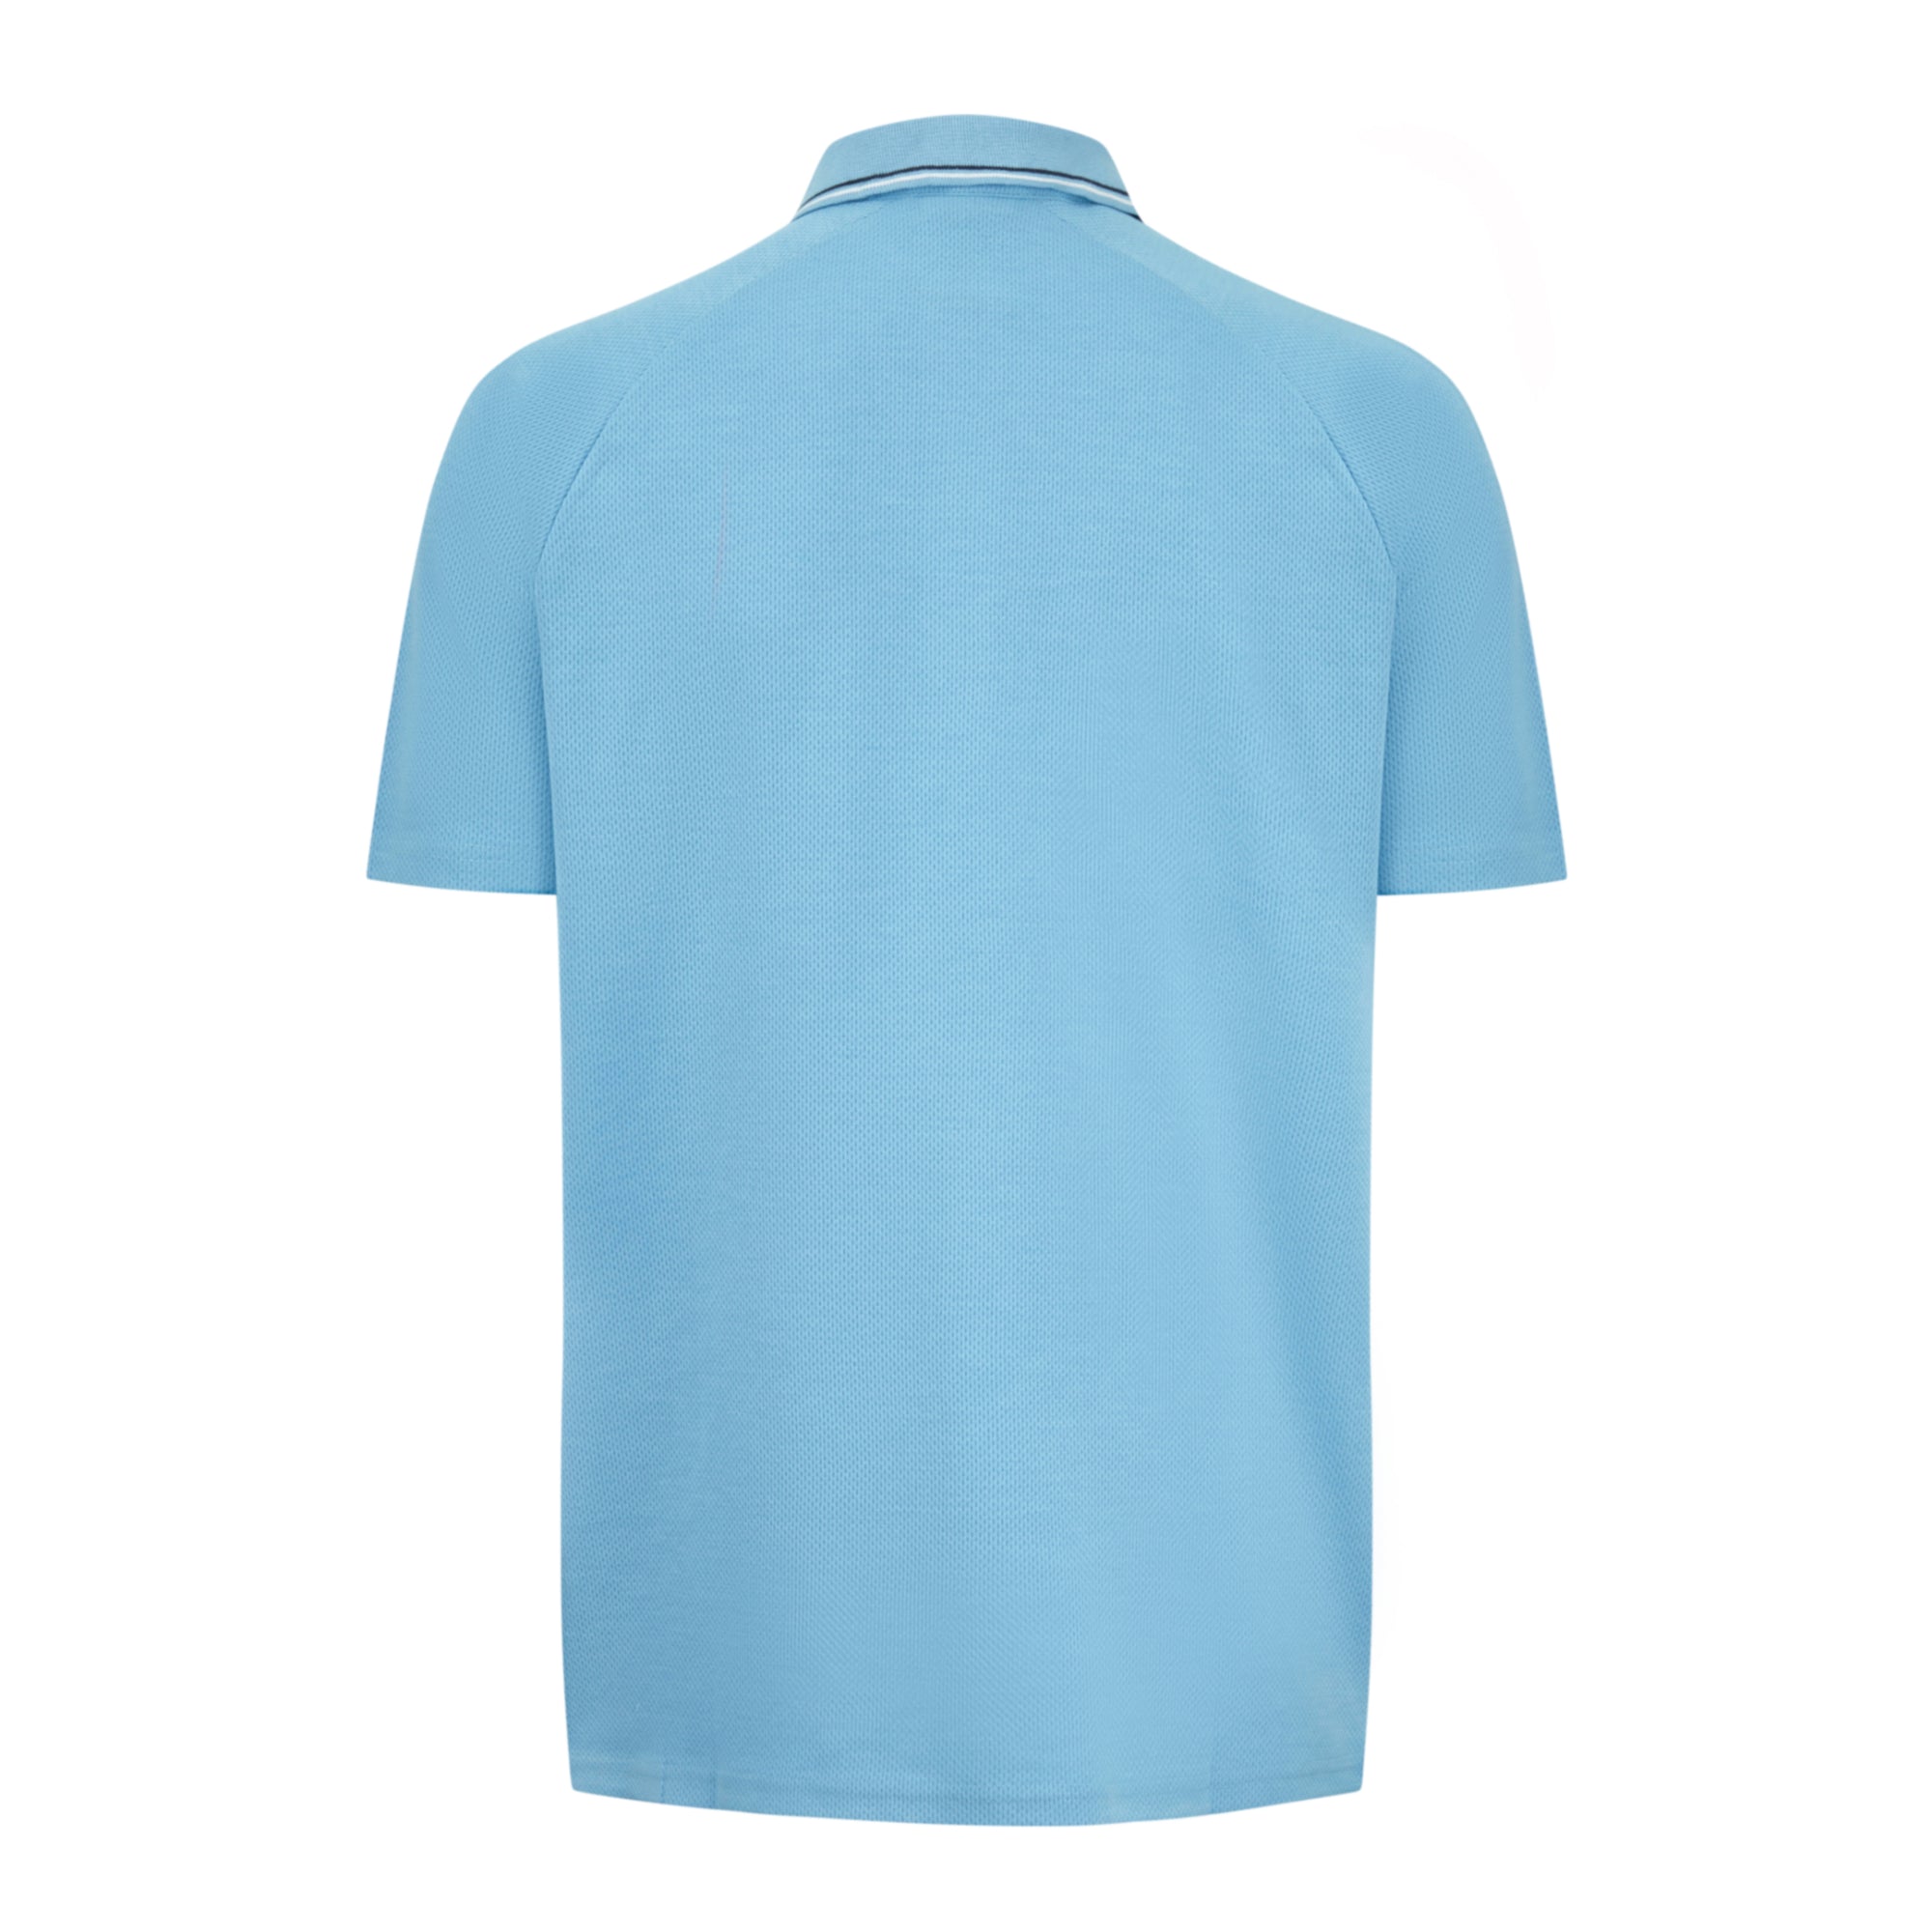 2023 Ryder Cup Men's Sky Blue Polo - Front